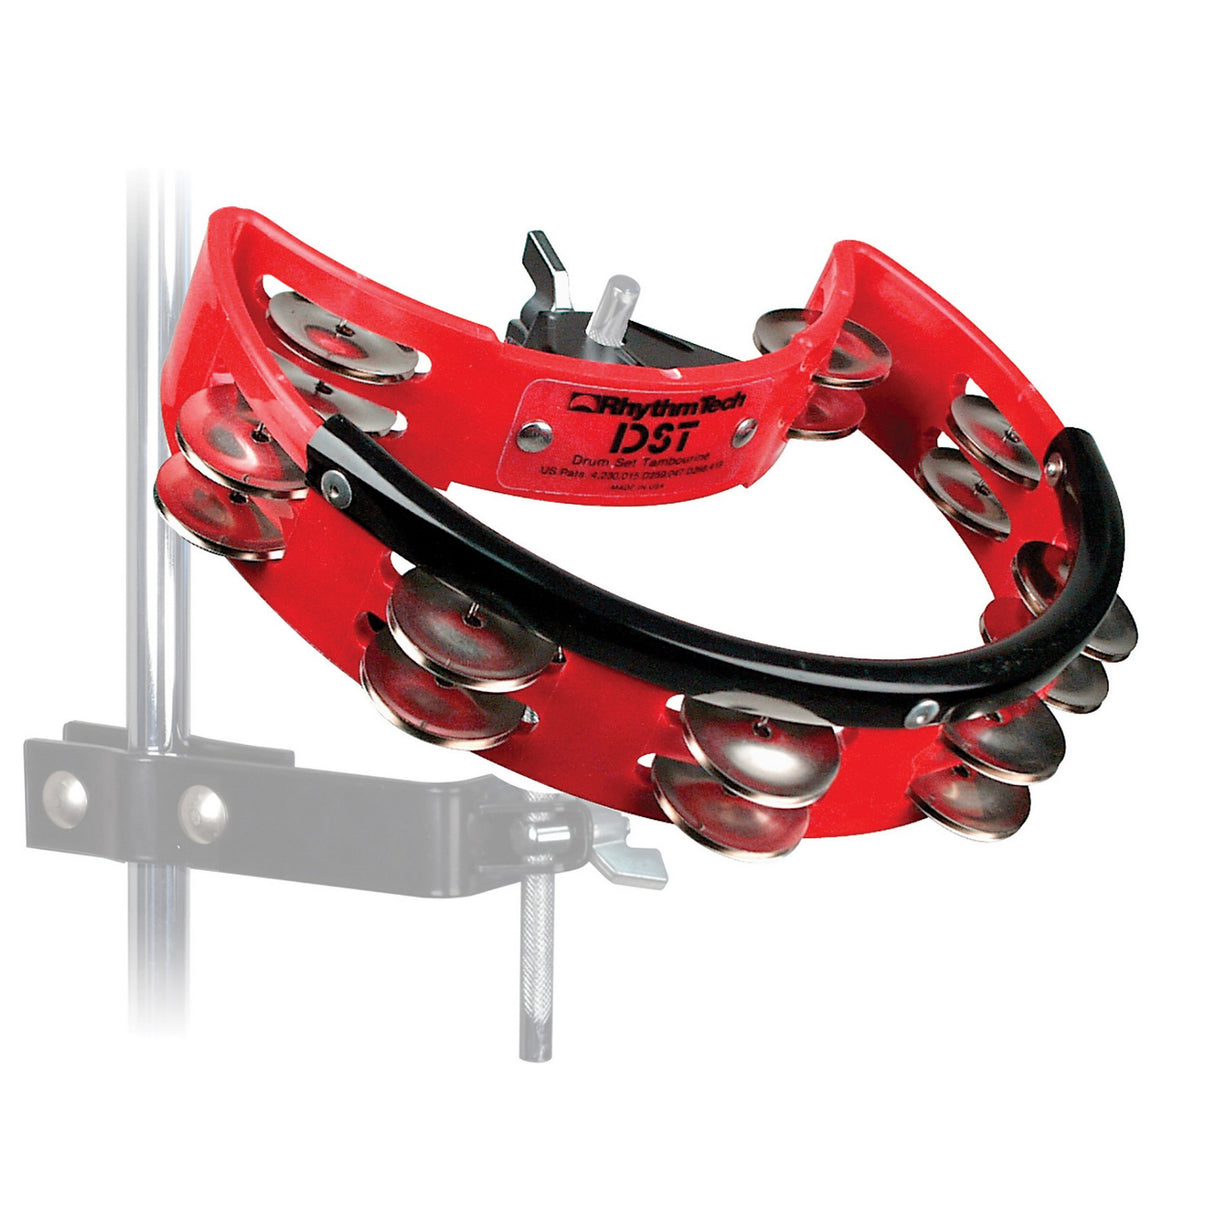 Rhythm Tech DST30 Drum Set Tambourine, Red with Nickel Jingles